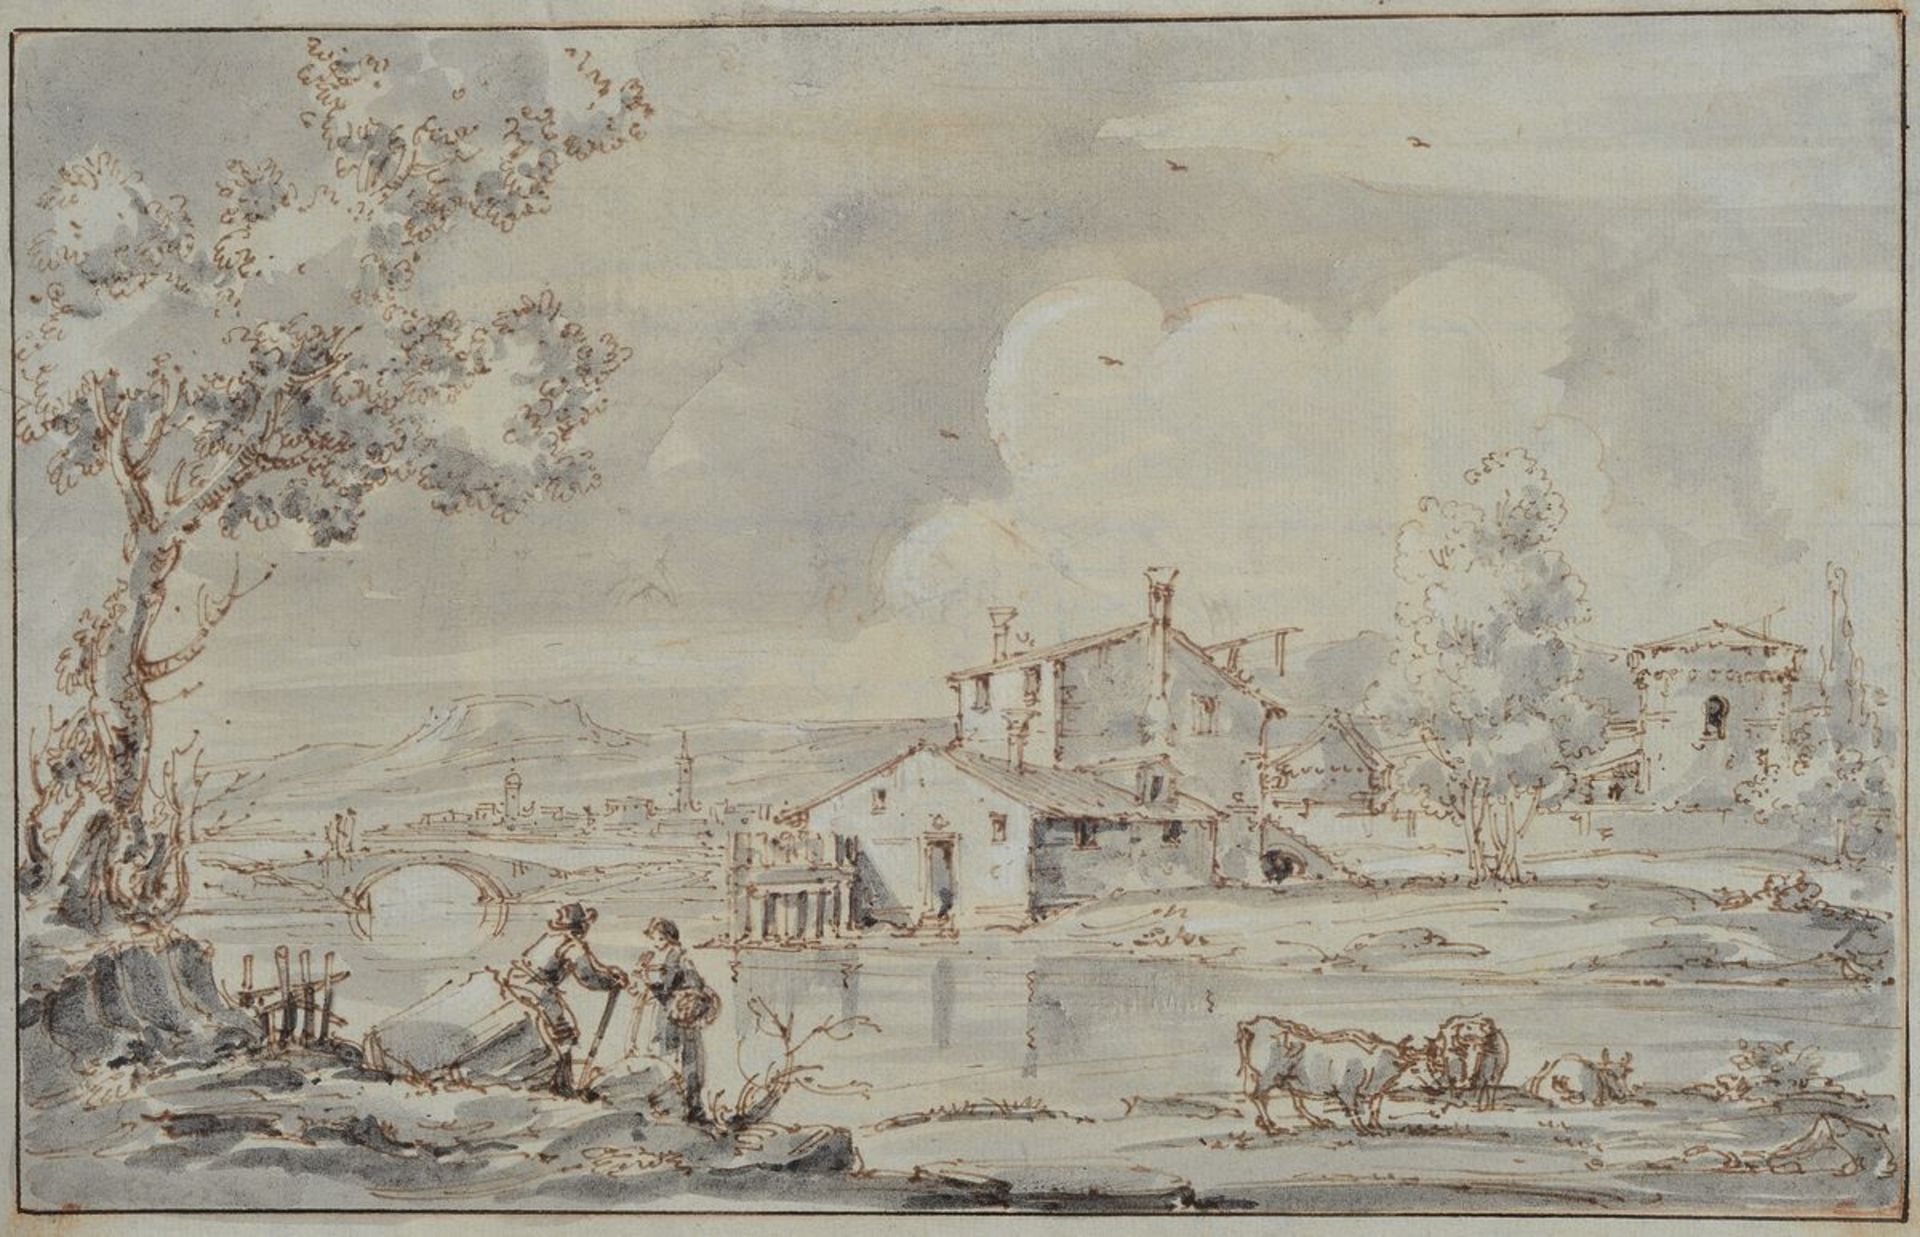 3 wash pen and ink drawings, 18th C., two views from Venice approx. 18x28cm and 20x29cm,farmstead on - Image 2 of 6